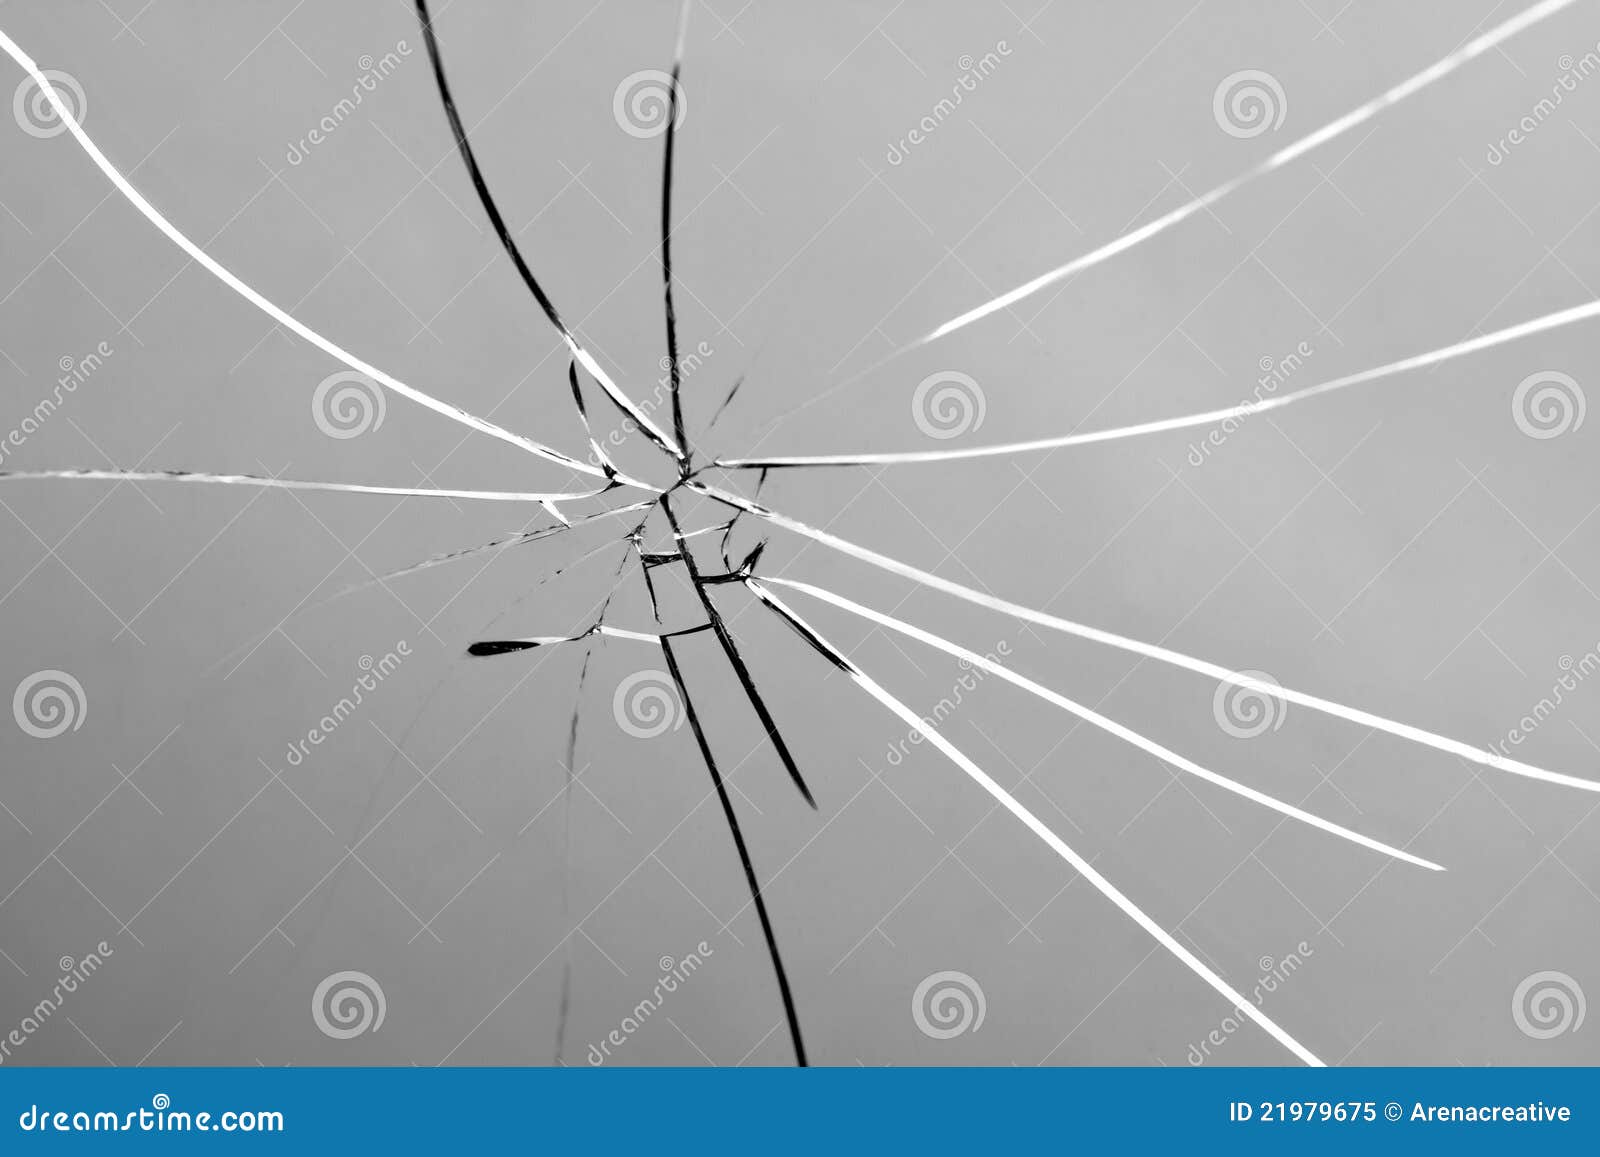 Broken and Shattered Glass Pane Stock Image - Image of crime, shatter:  21979675